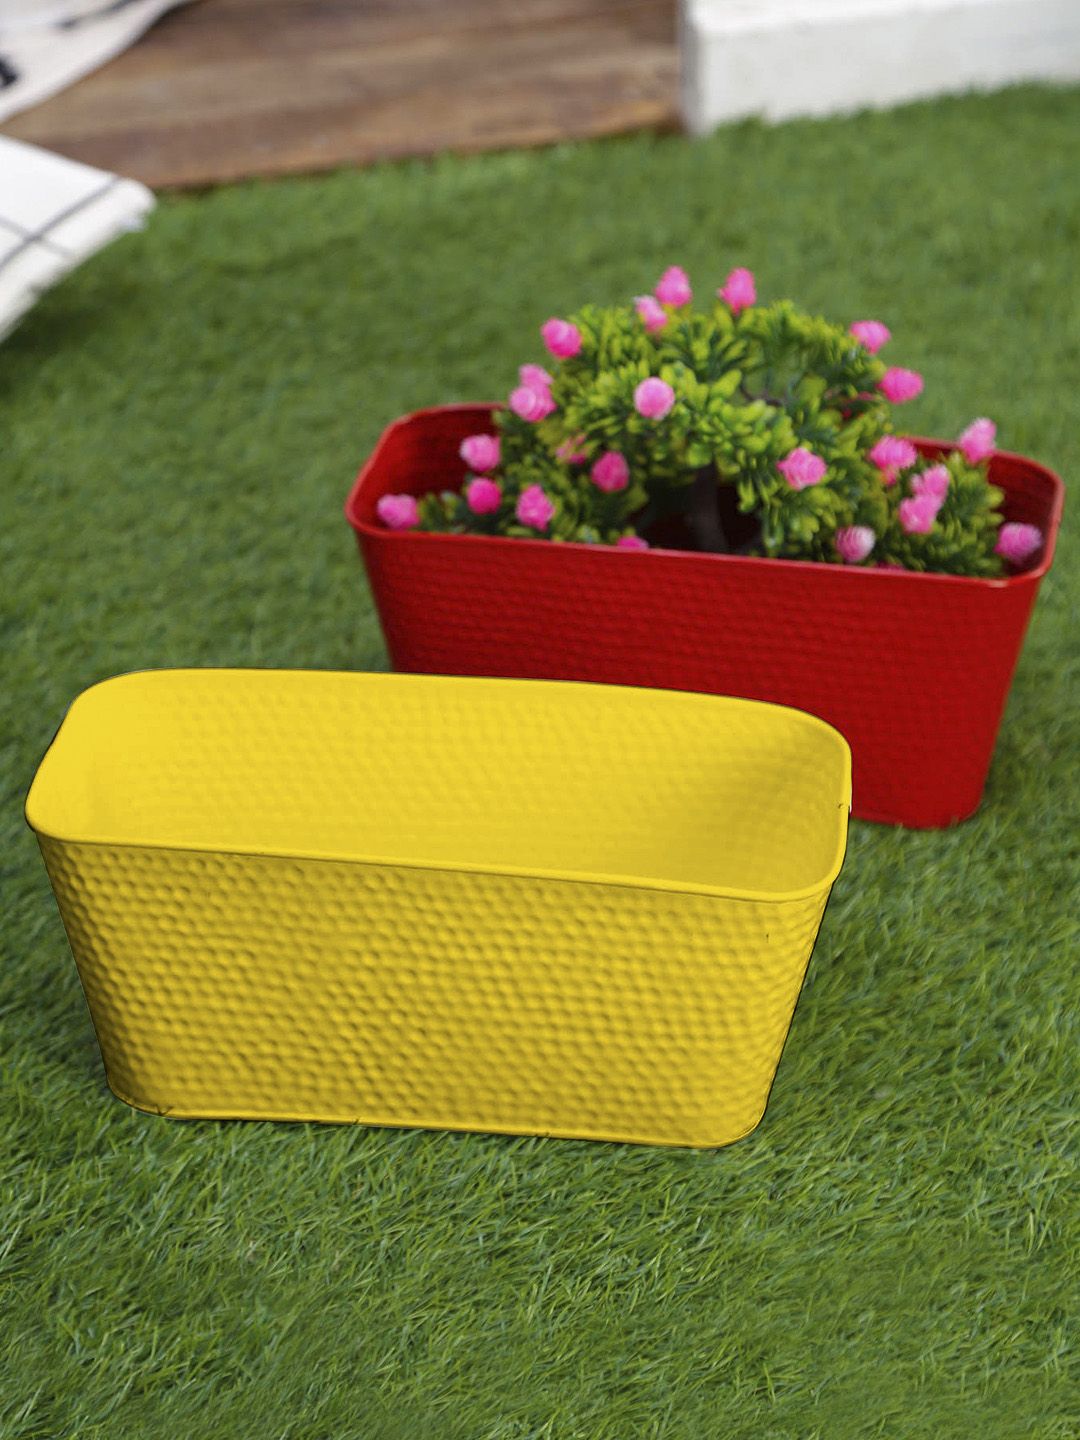 green girgit Set Of 2 Red & Yellow Textured Planters Price in India